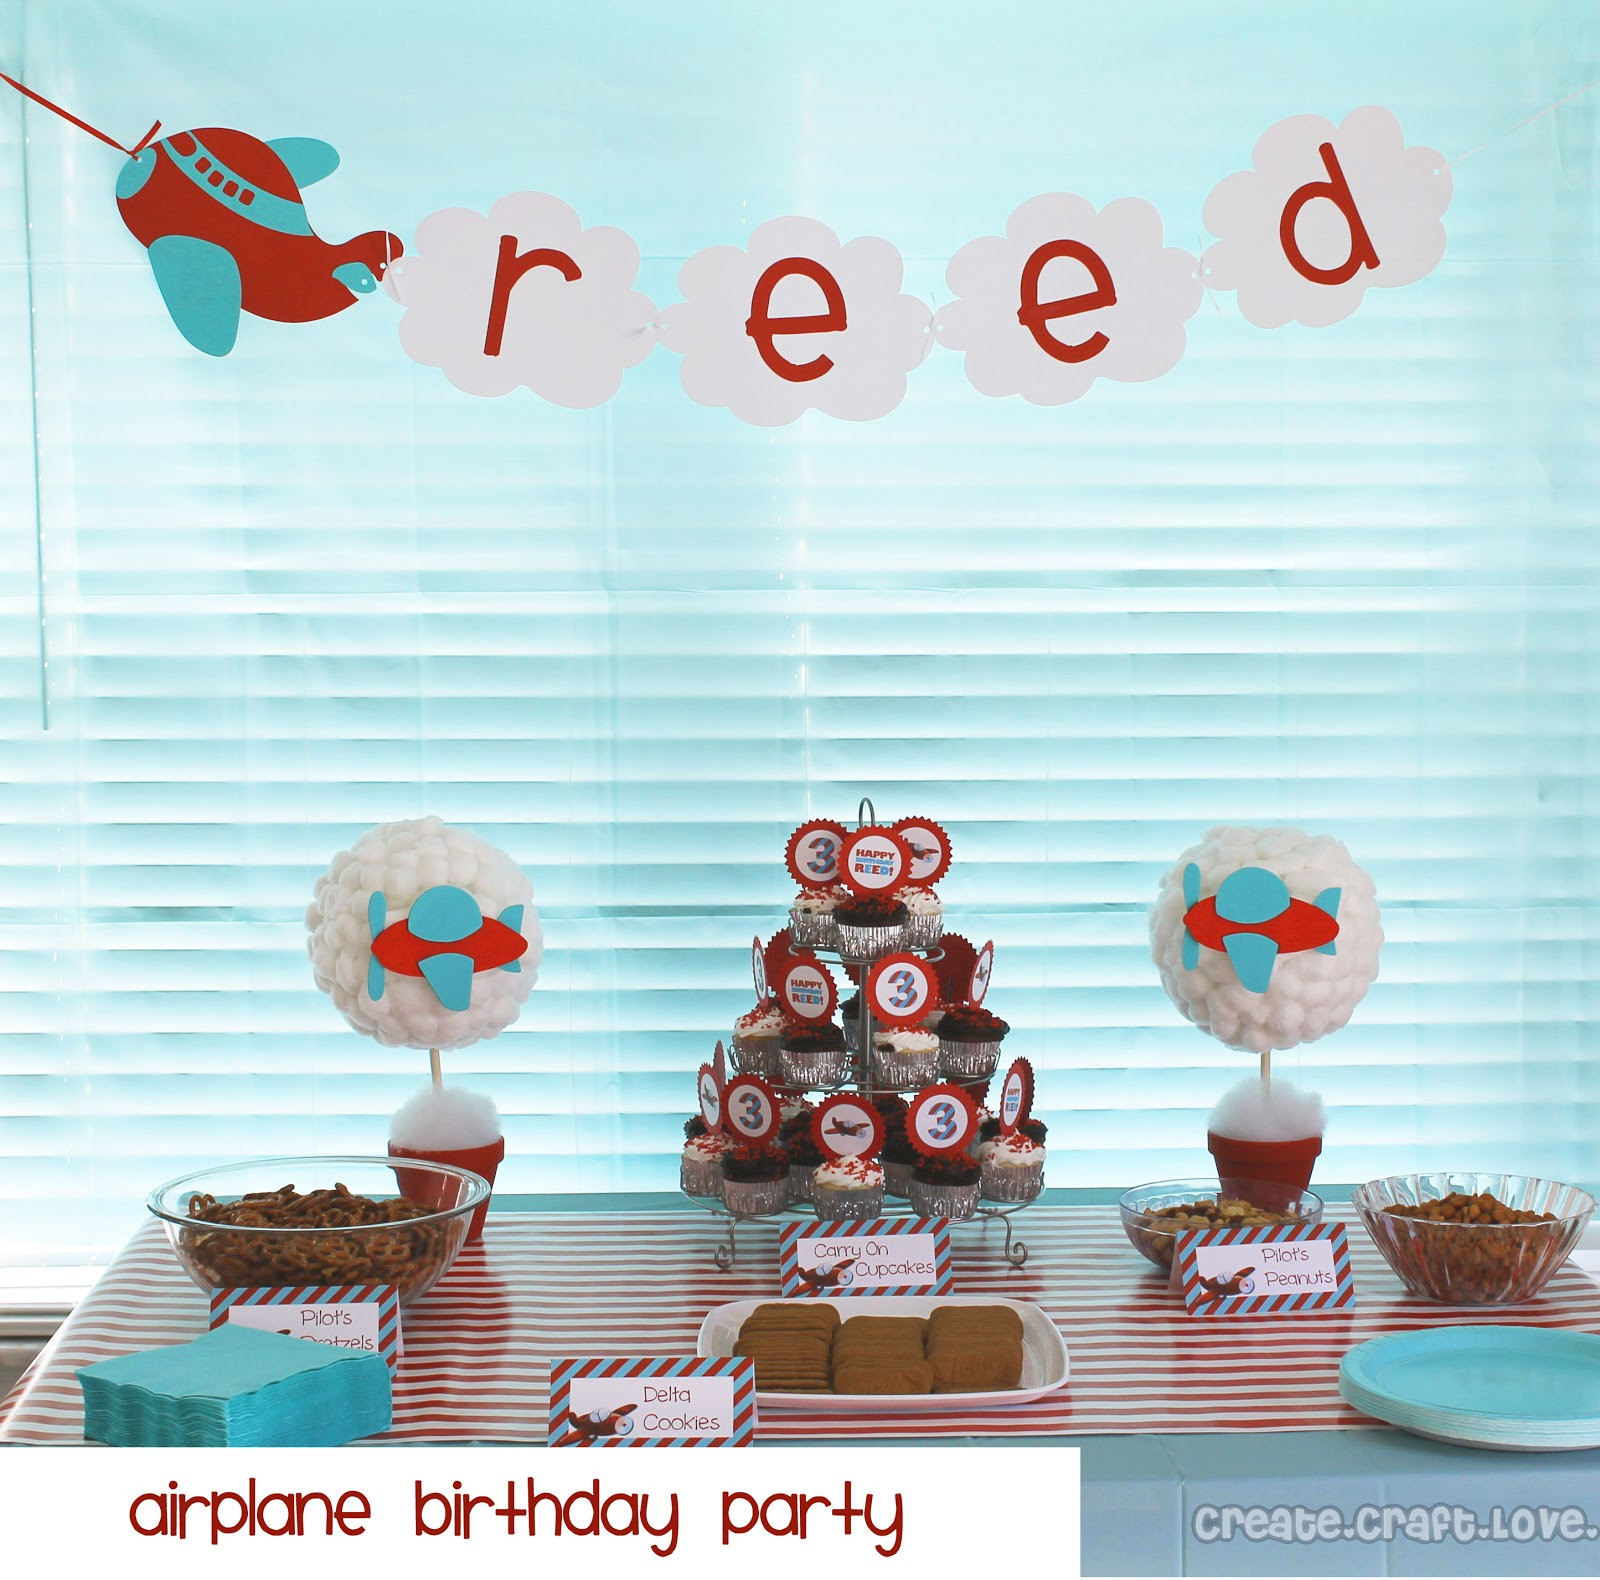 Airplane Birthday Party Decorations
 Airplane Birthday Party Create Craft Love